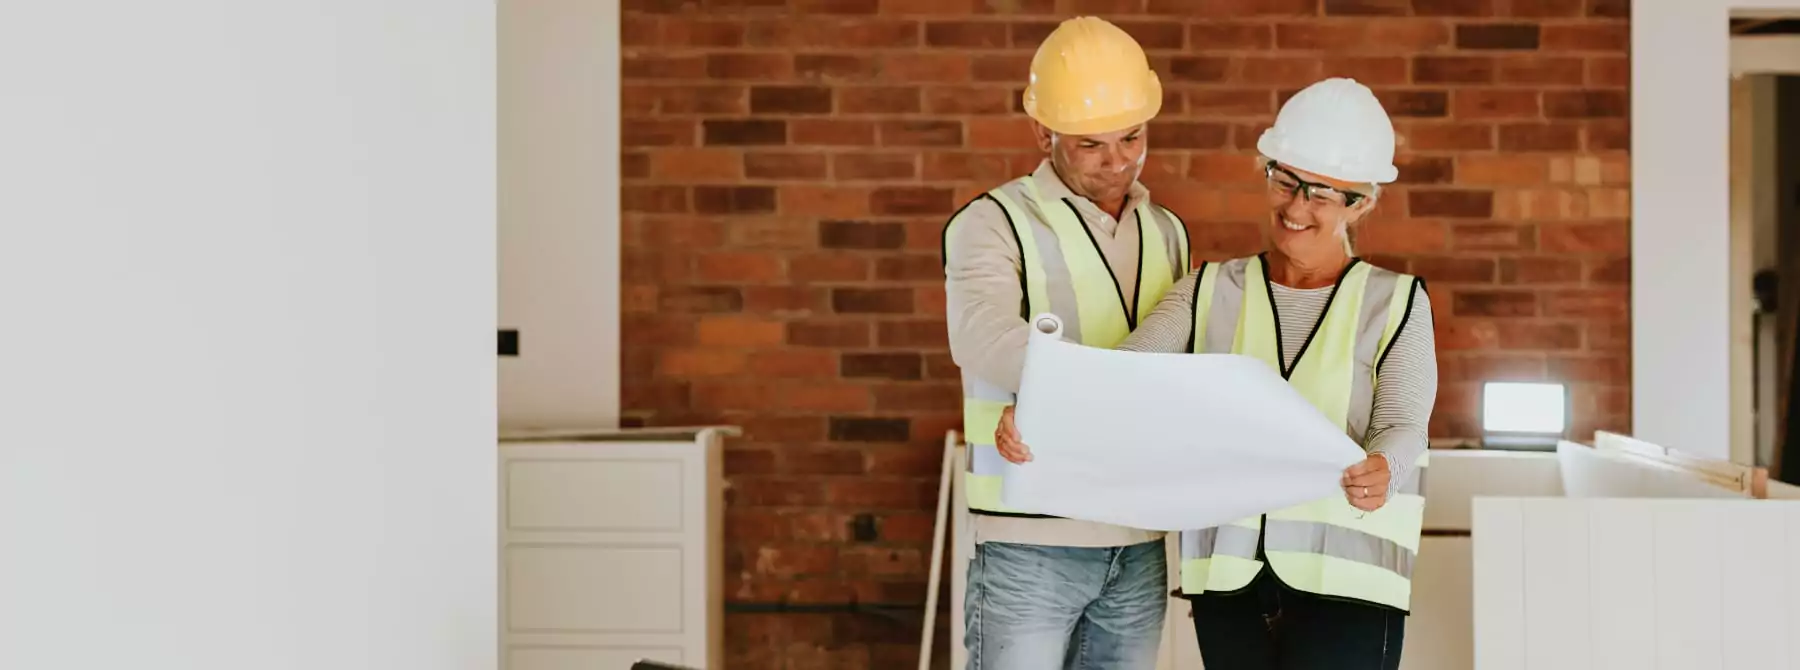 Groysman Construction Remodeling | Home Renovation Mistakes to Avoid